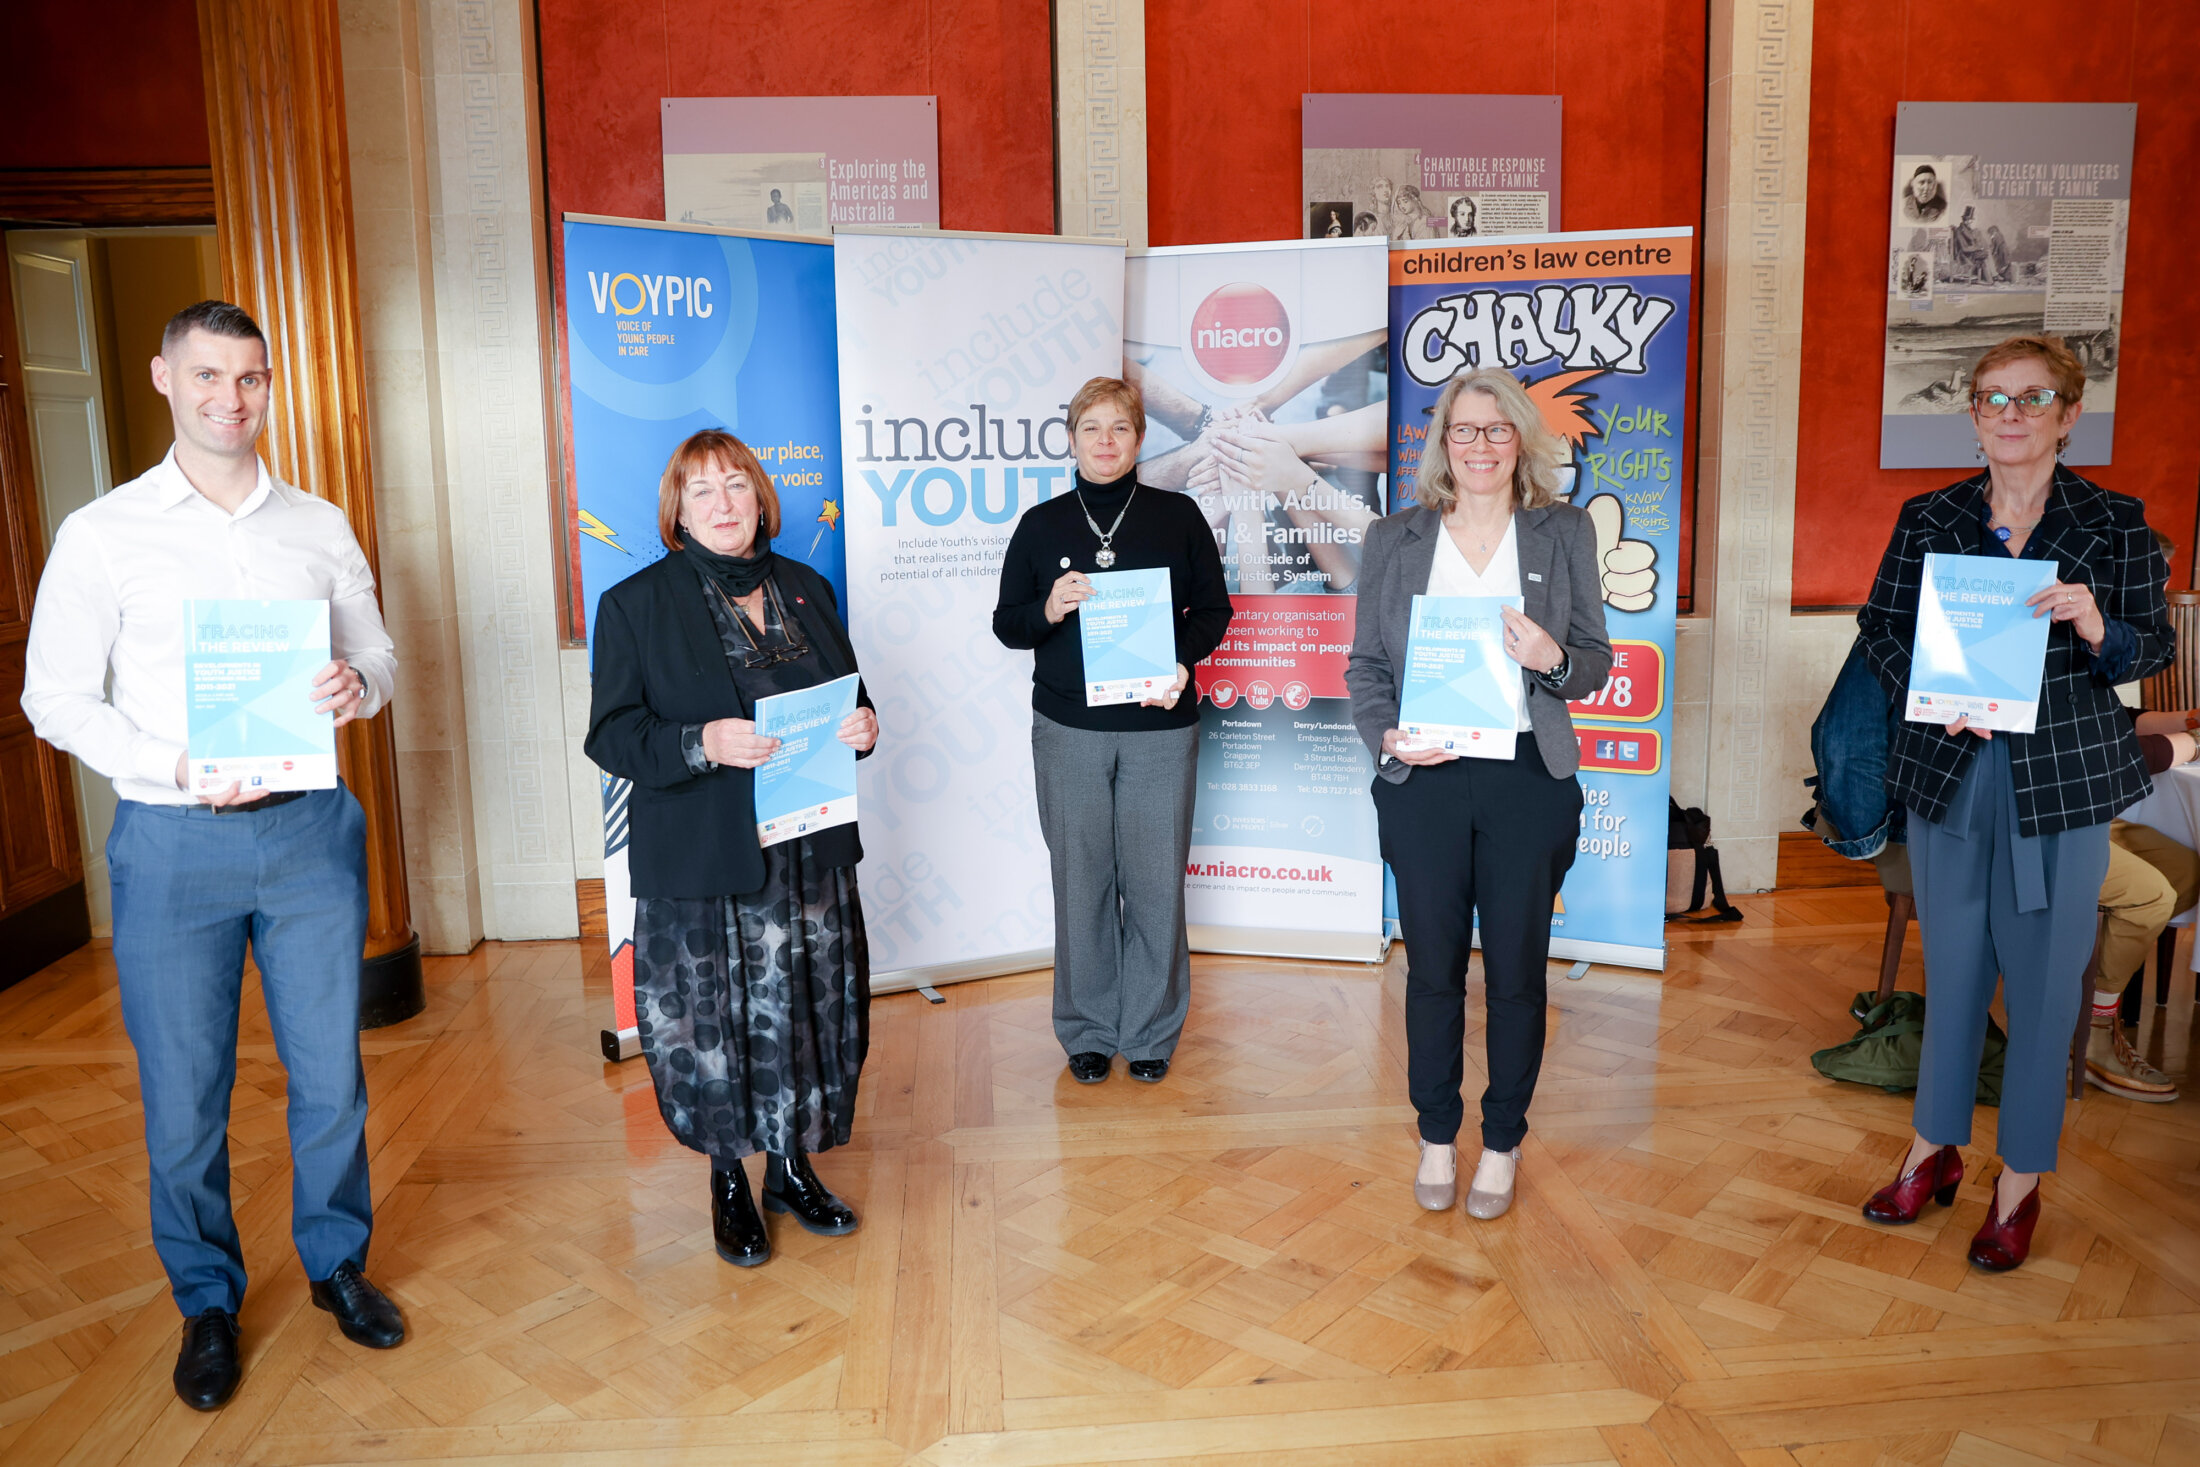 Left to right: Paul McCafferty (VOYPIC), Olwen Lyner (NIACRO), Children's Commissioner Koulla Yiasouma, Paula Rodgers (Include Youth), Paddy Kelly (CLC)